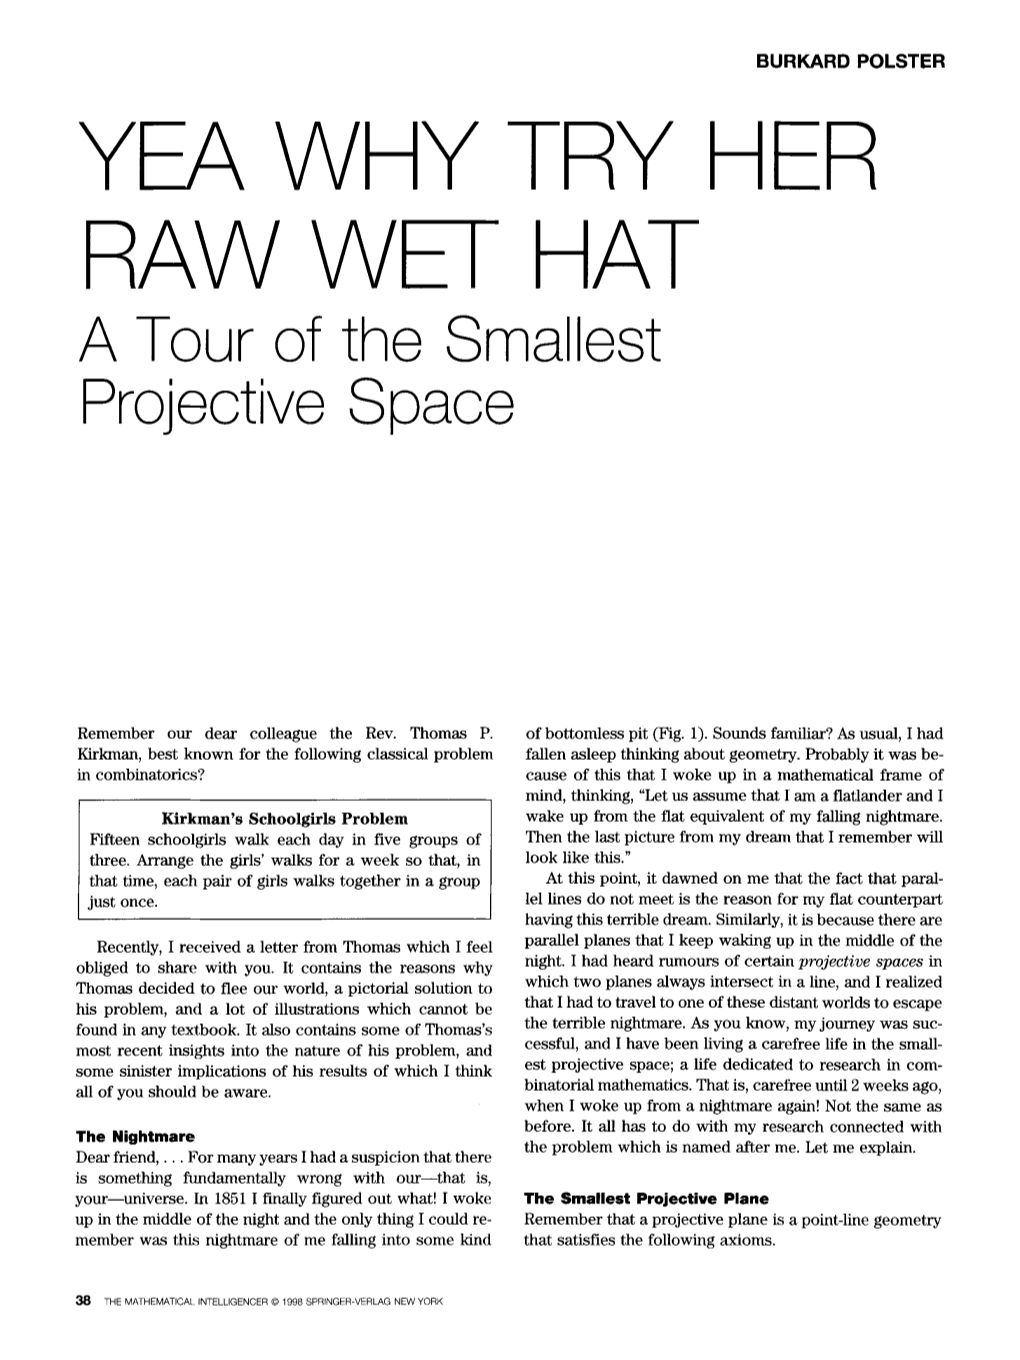 YEA WHY TRY HER RAW WET HAT! I Just Discov- World Scientific (1995), Pp